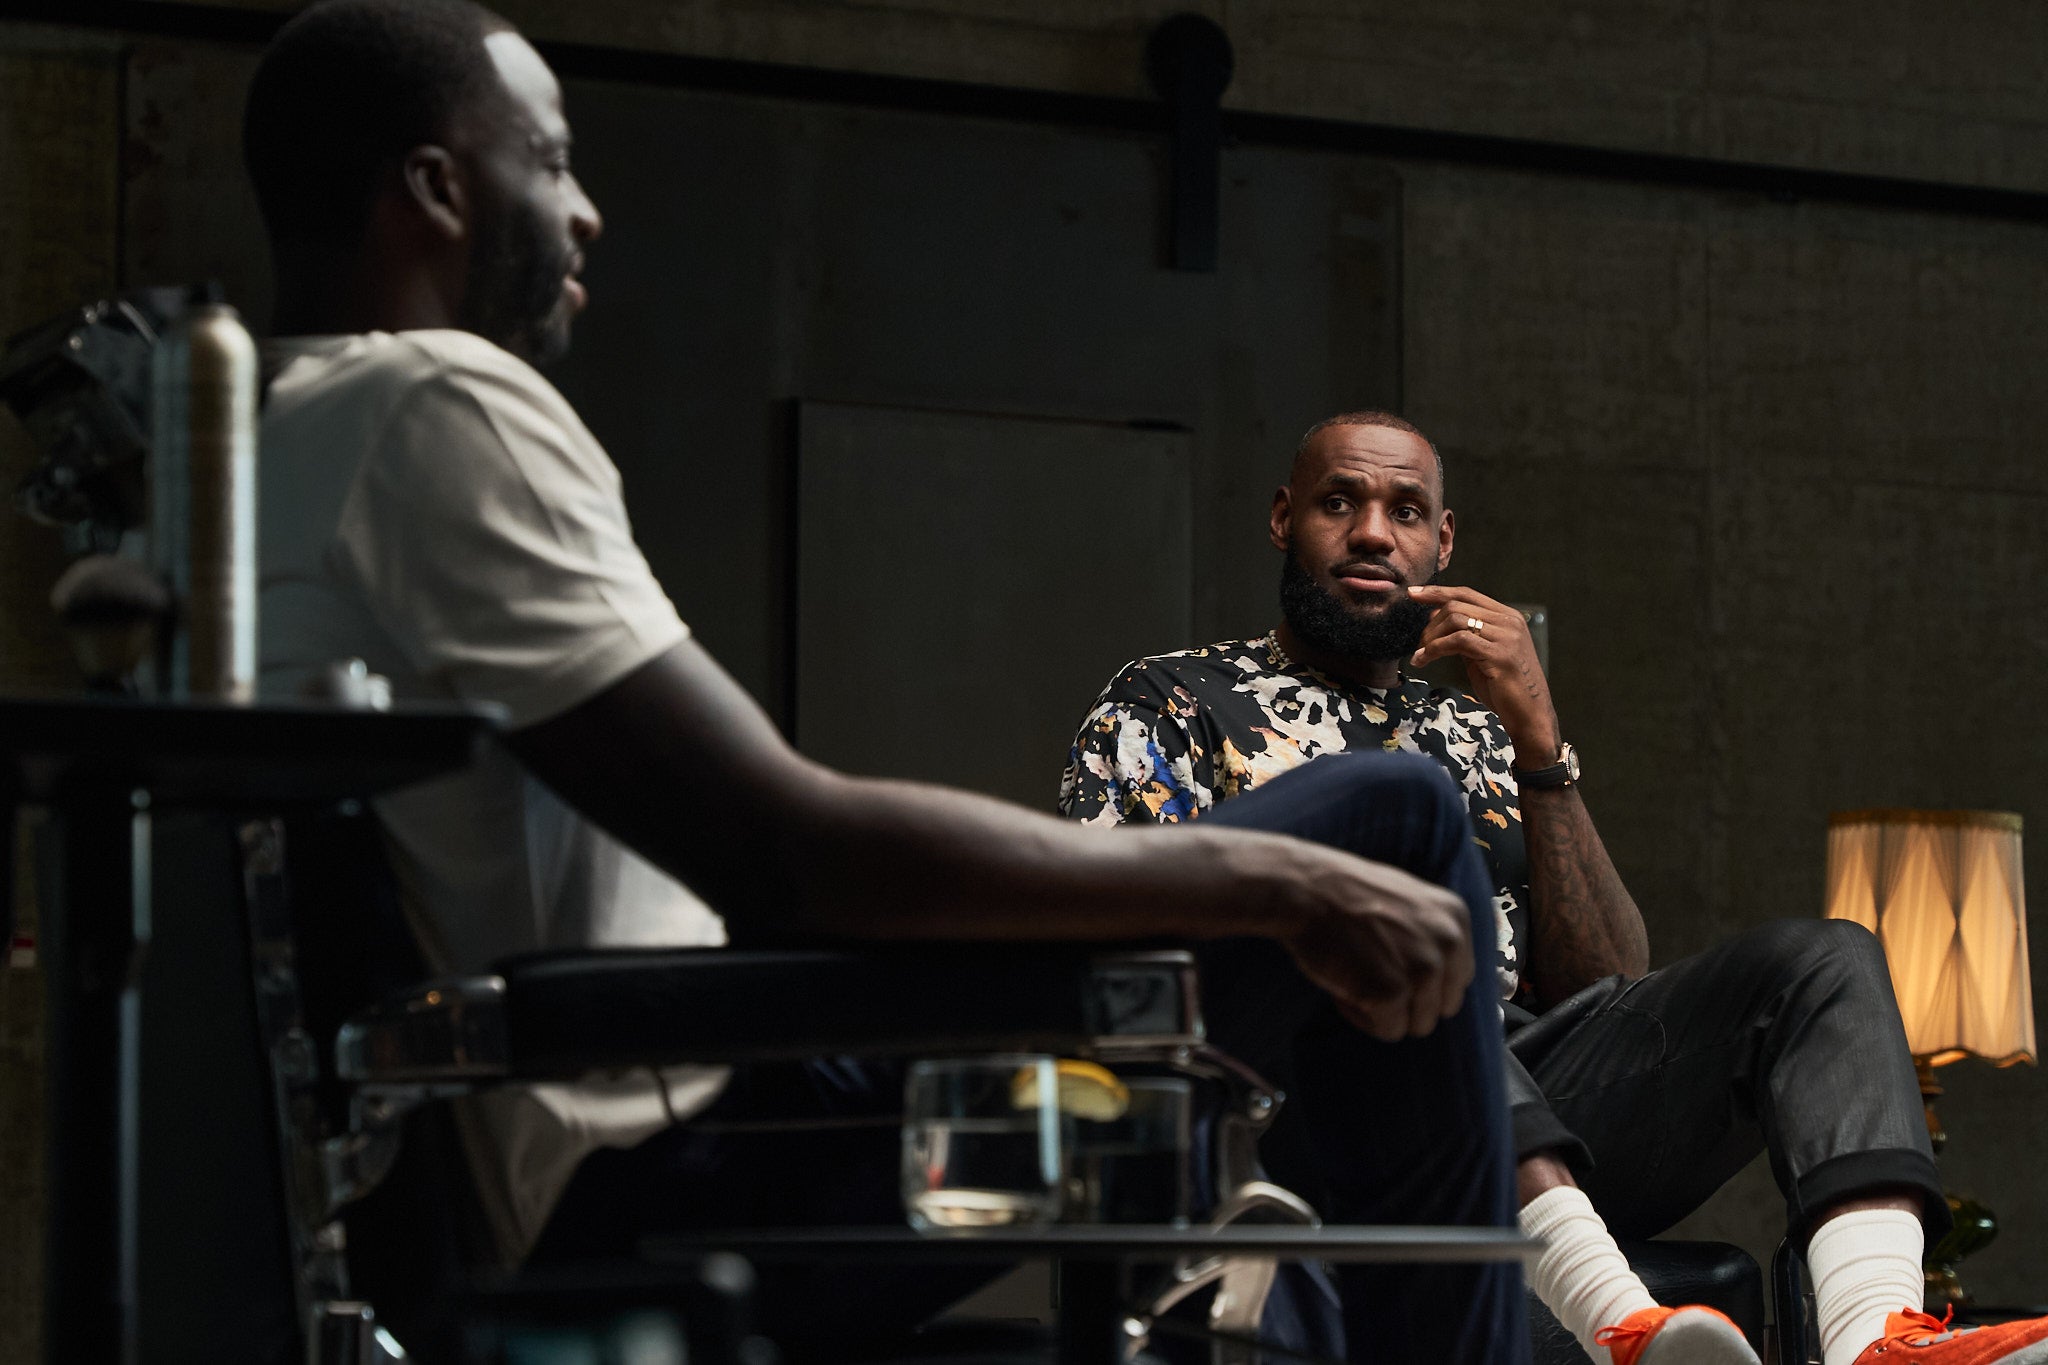 'KD Didn't Show Up': Draymond Green, LeBron James Talk Dealing With Tricky Guests And Crashers At Their Weddings